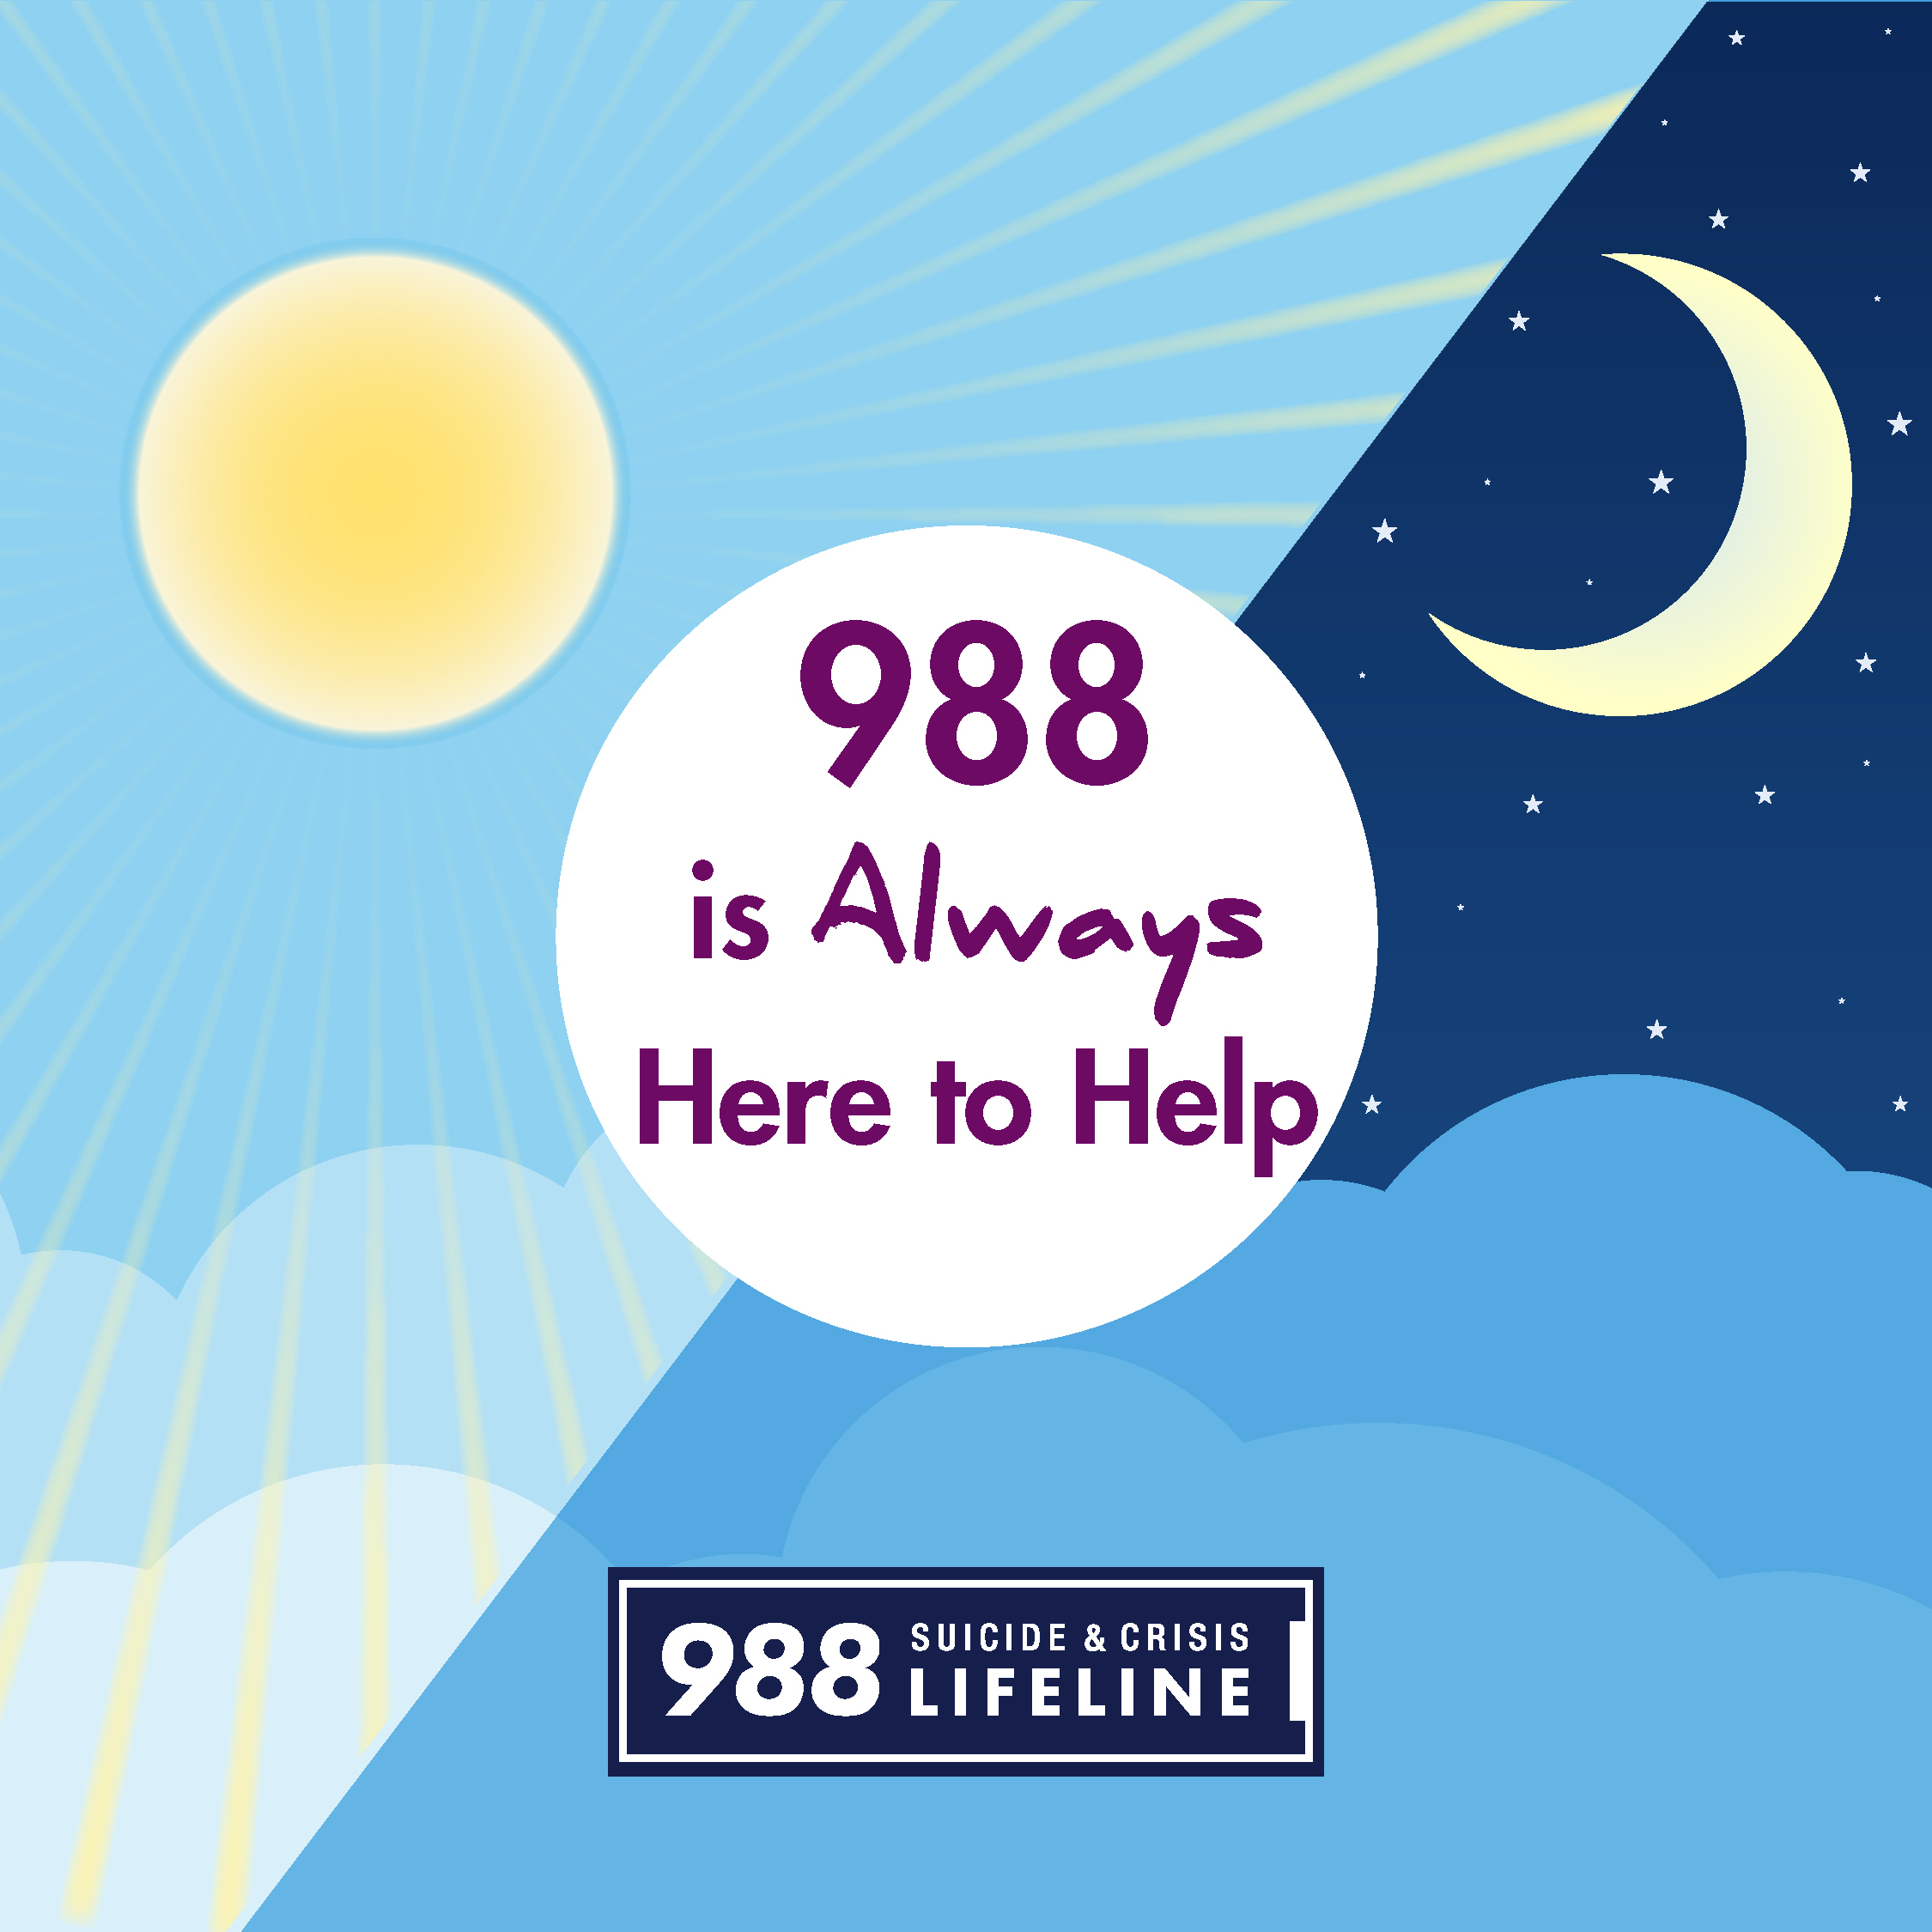 Illustration of a sun and moon, with text, “988 is always here to help,” and “988 suicide and crisis lifeline”